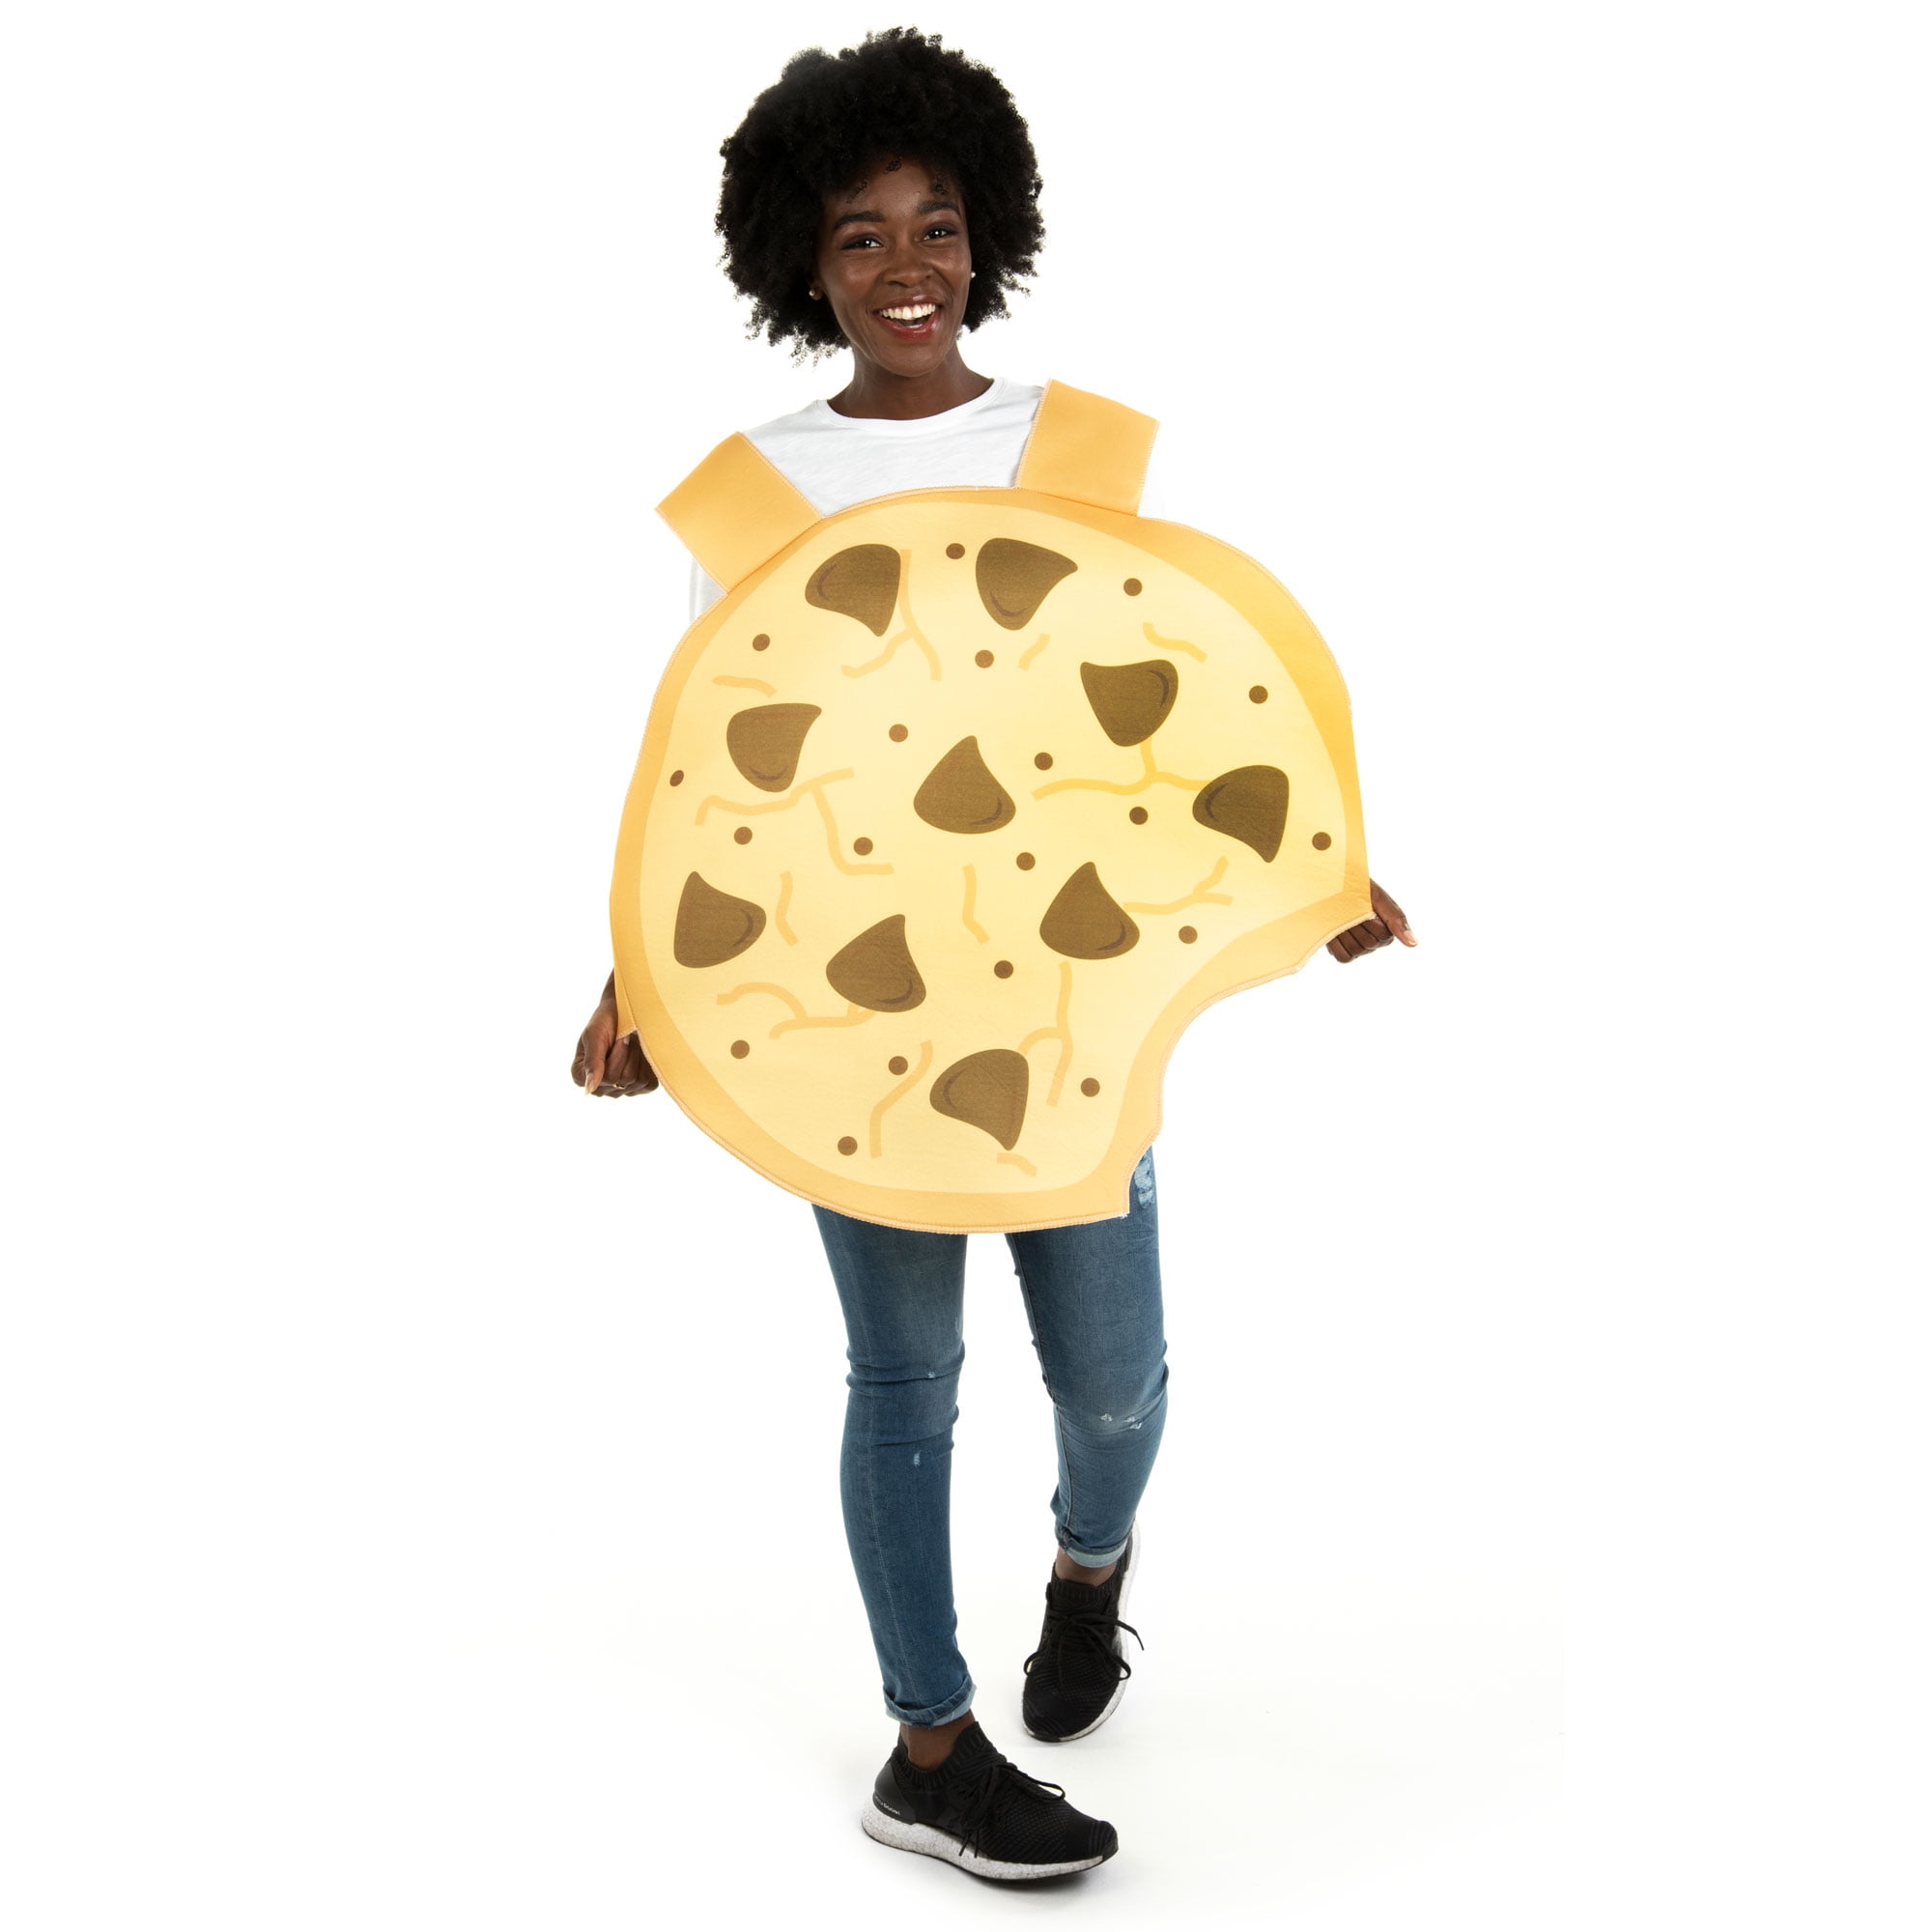 Hauntlook Chocolate Chip Cookie Halloween Costume - Funny Food Outfit ...